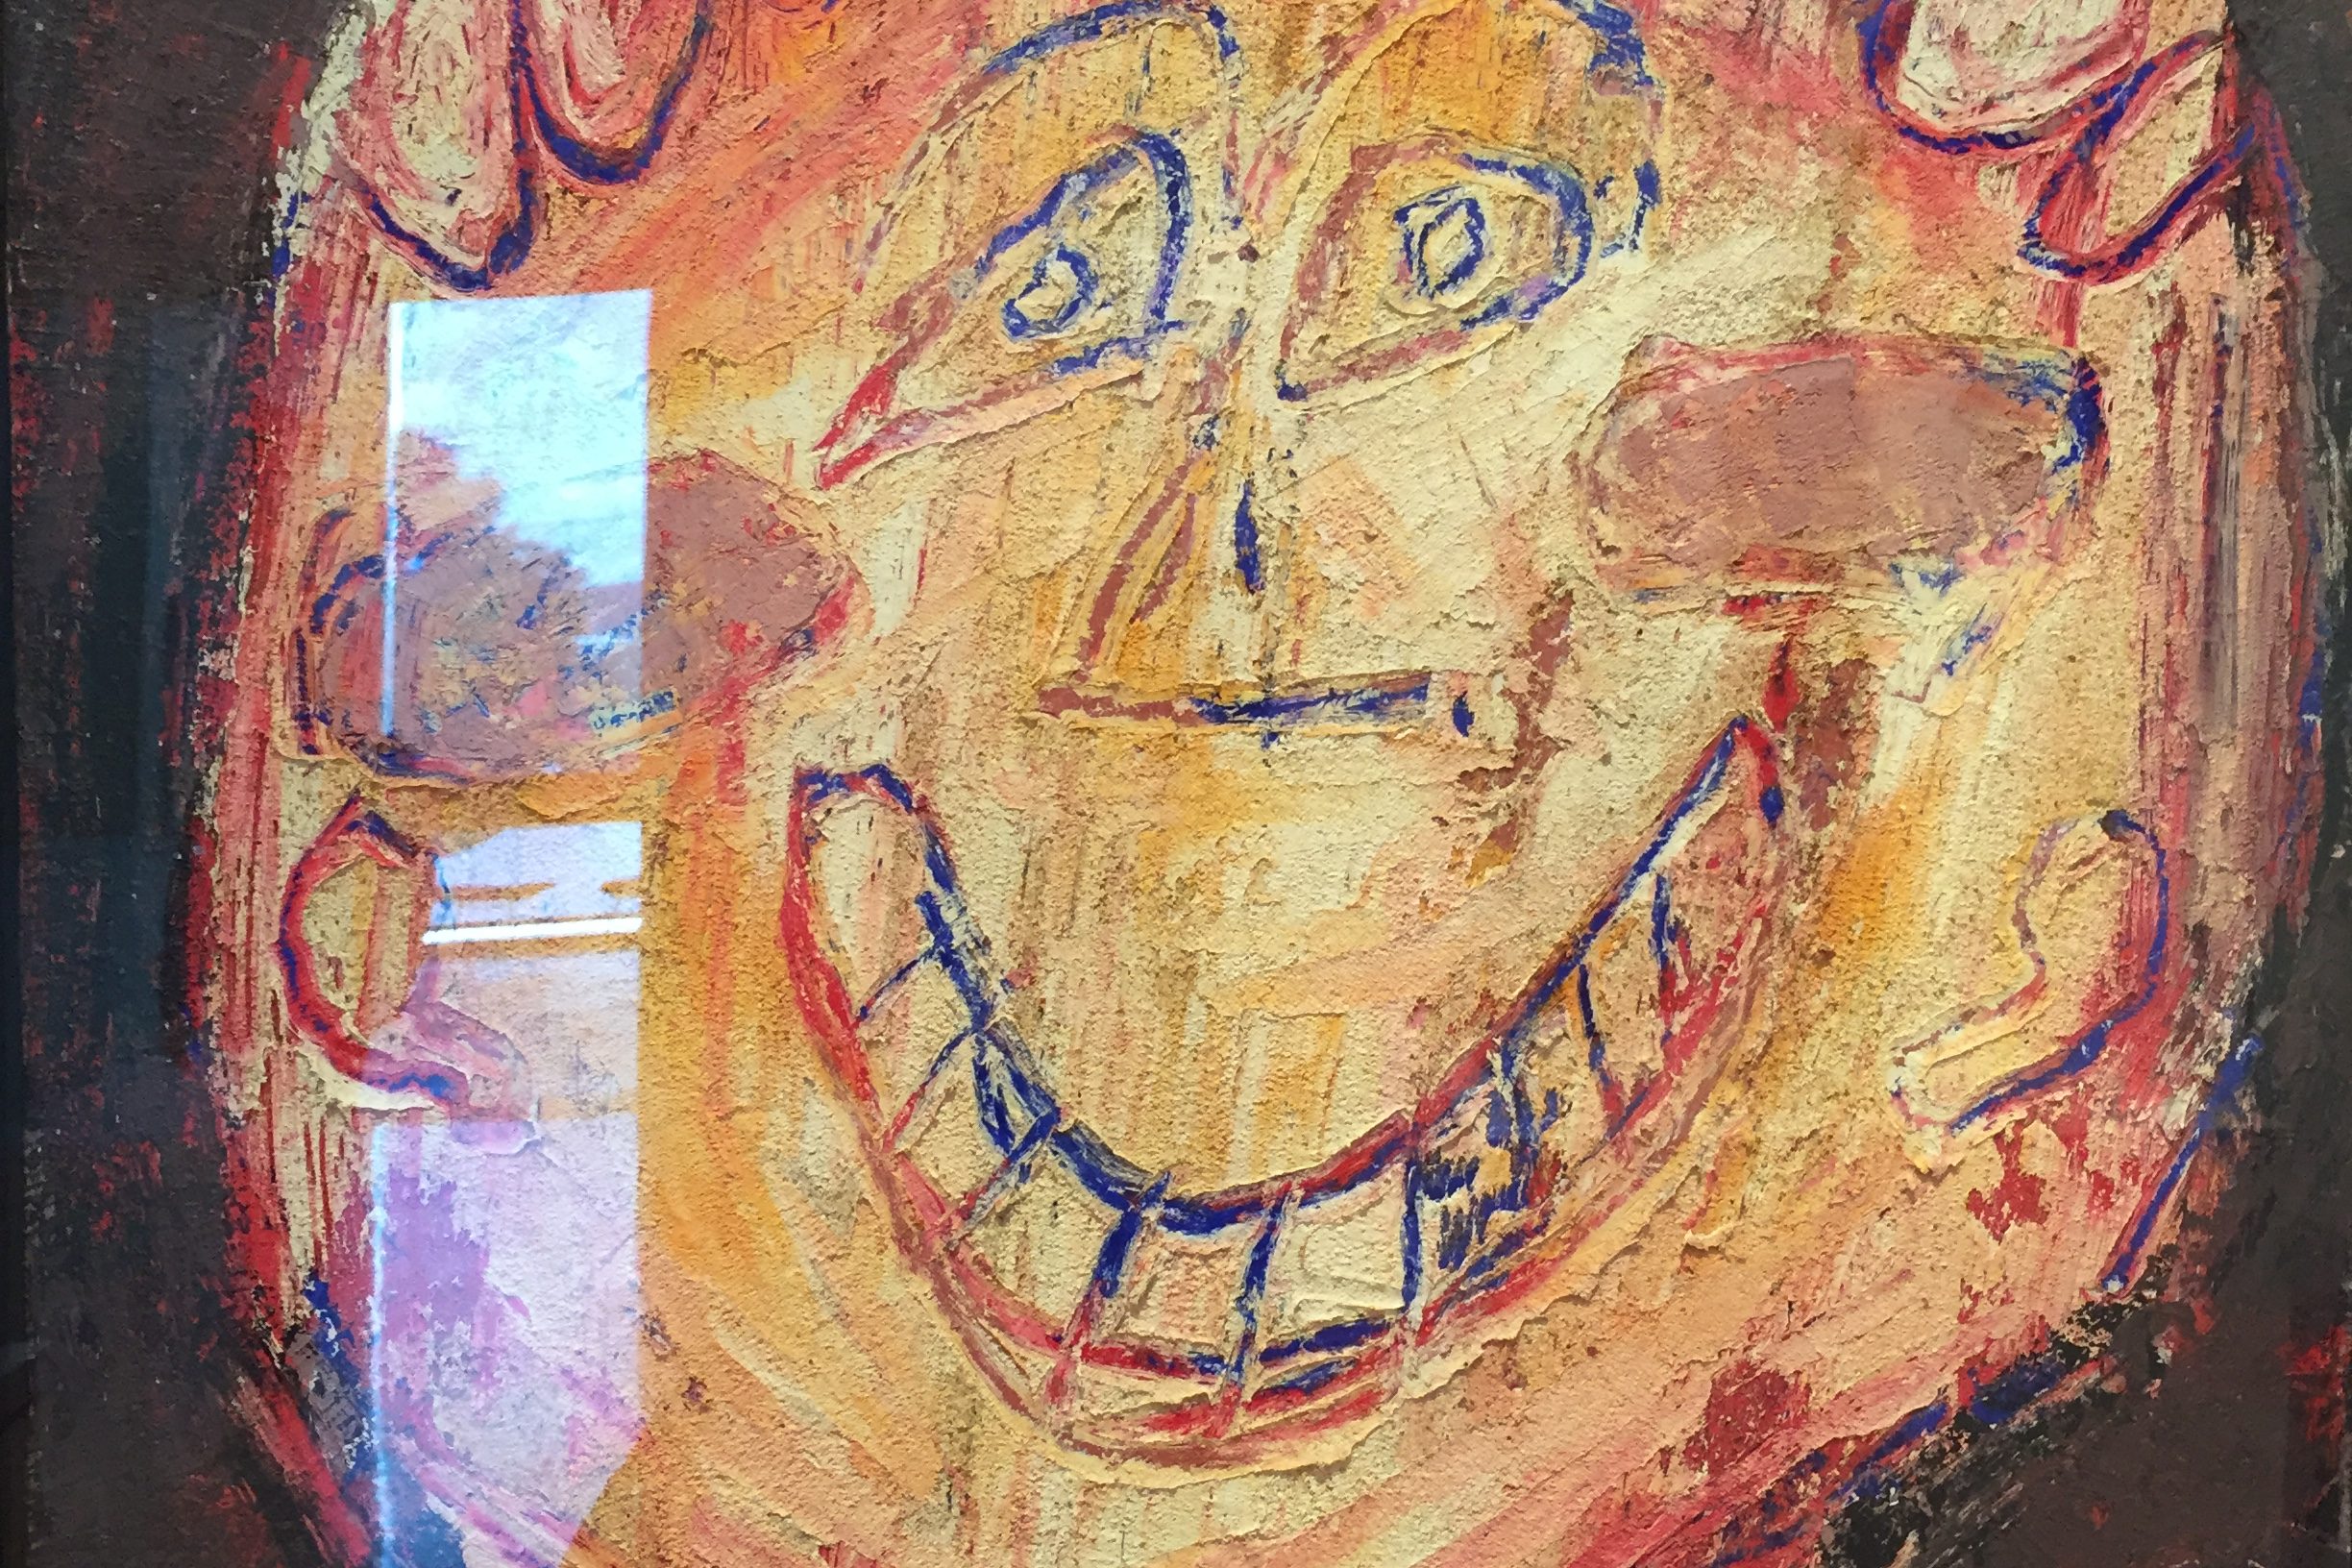 Painting of smiling person